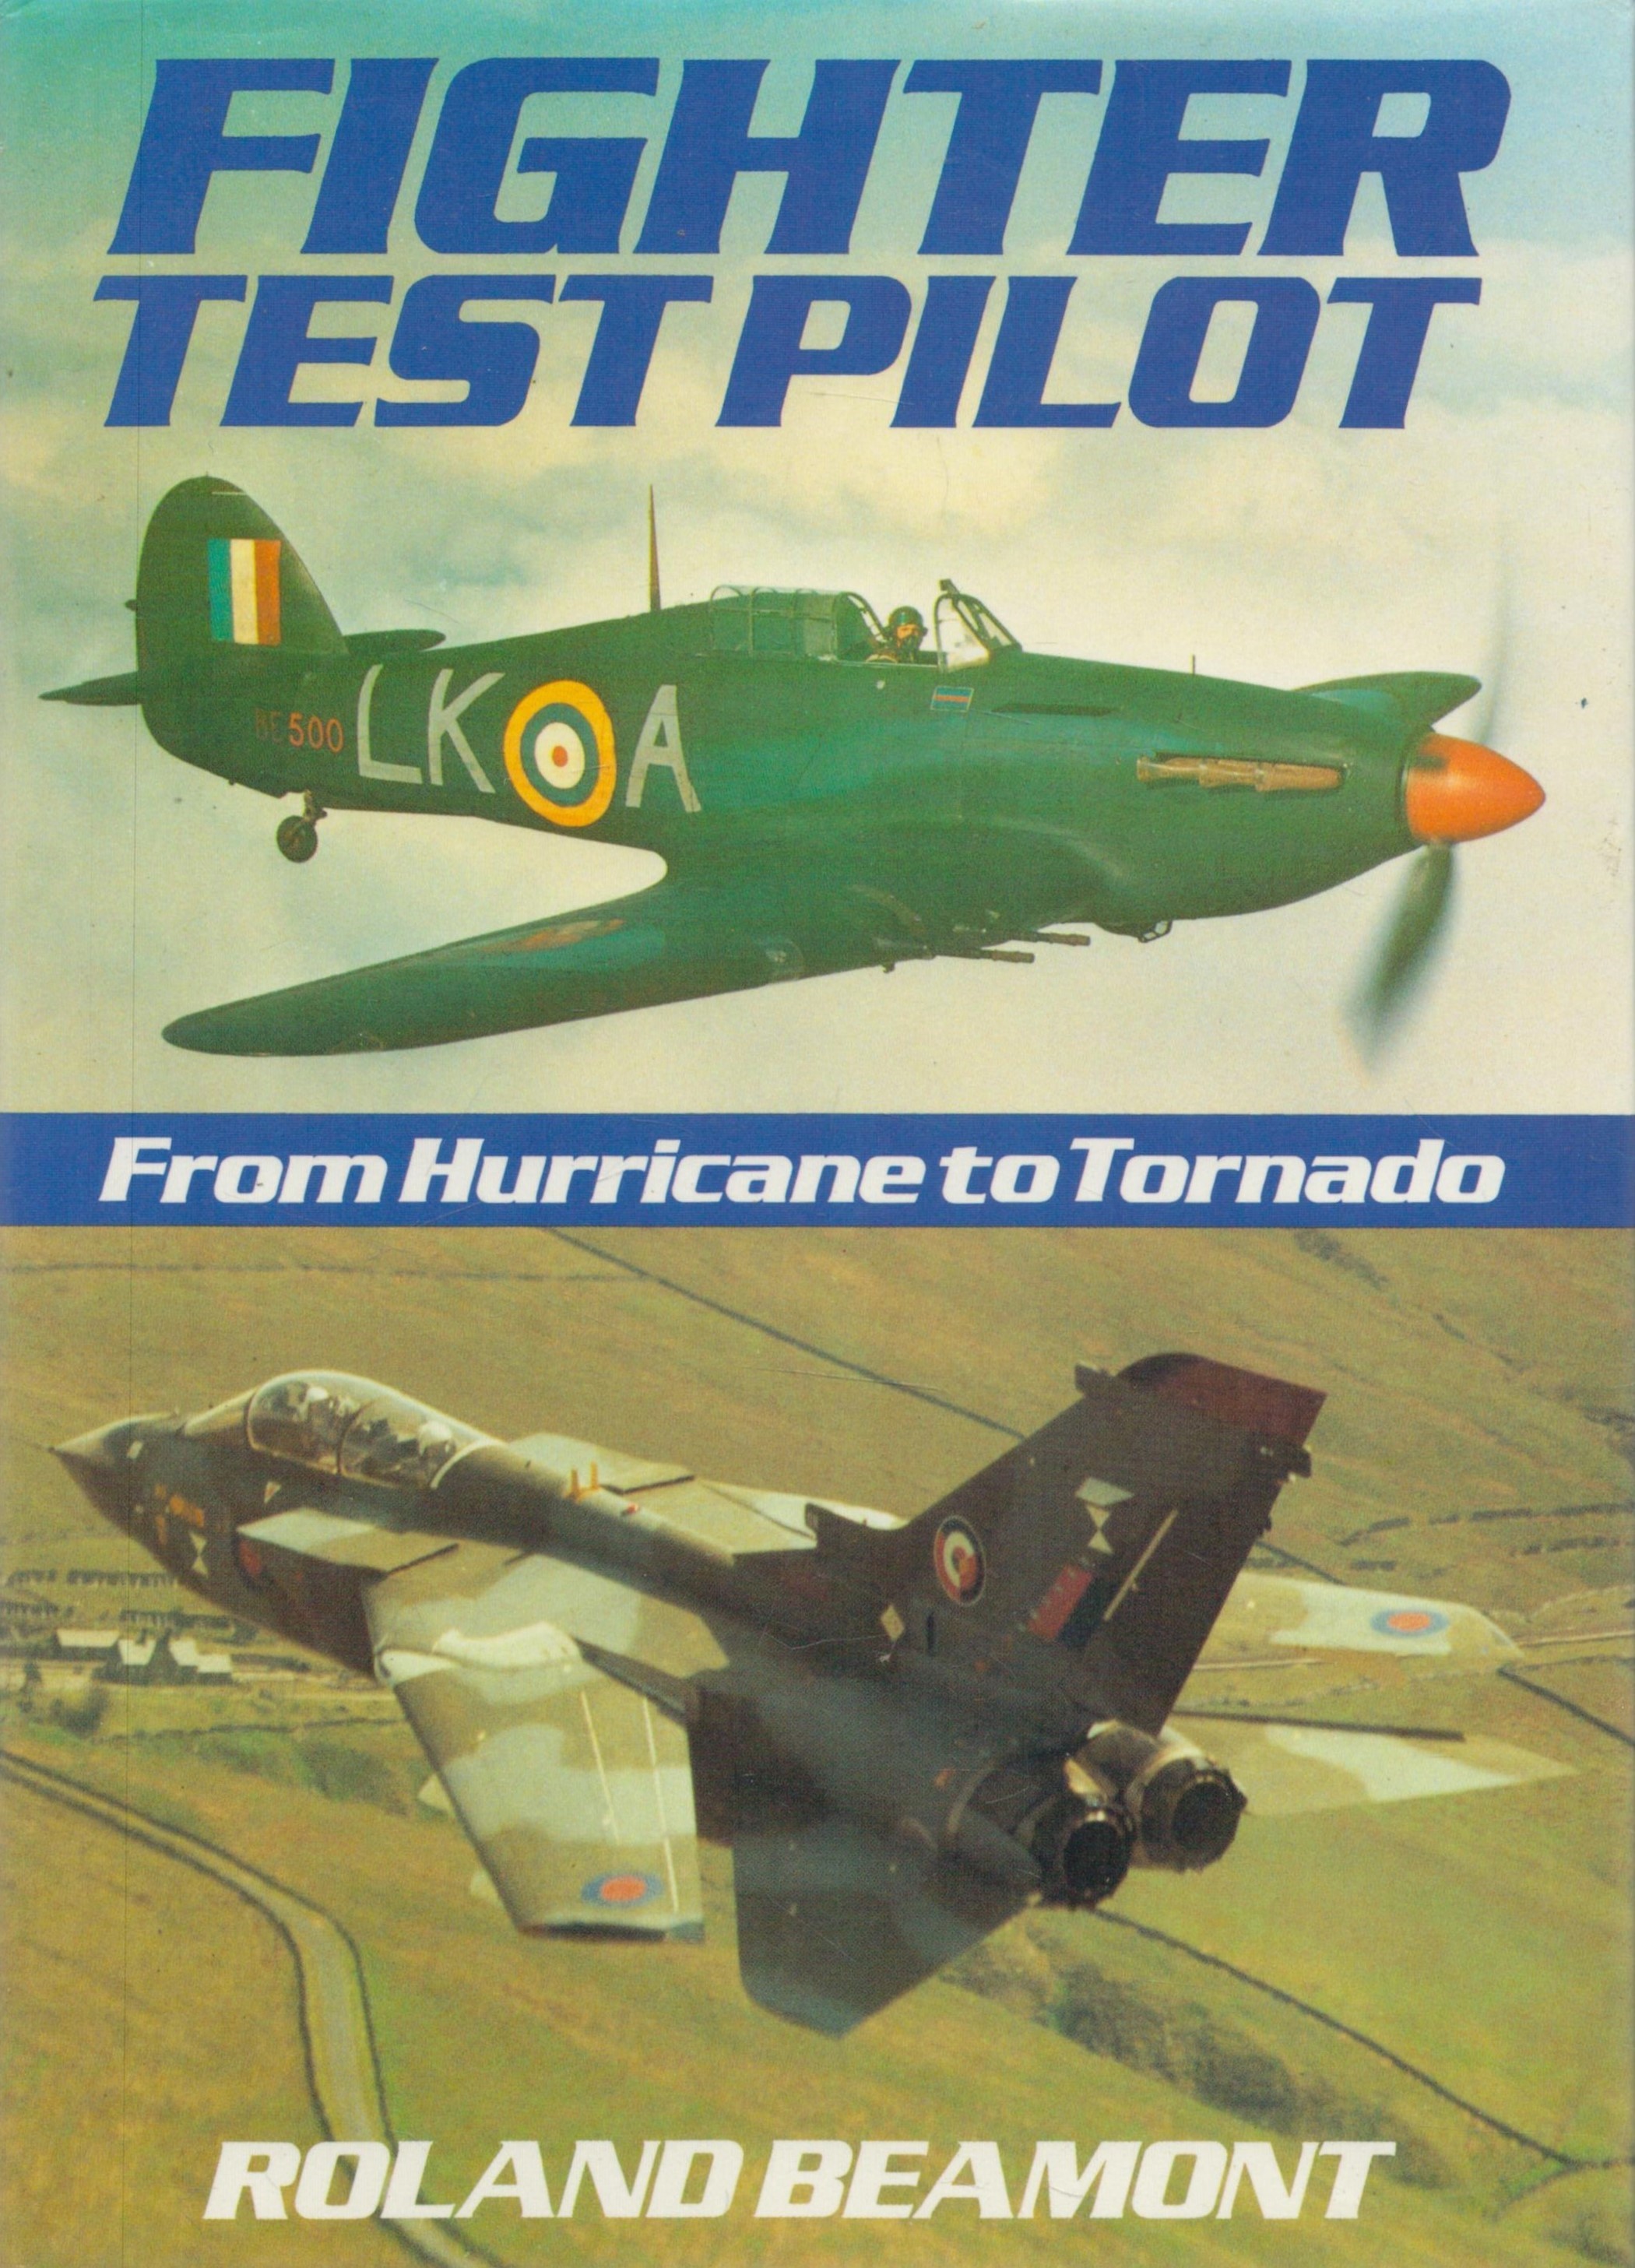 Fighter Test Pilot from Hurricane to Tornado by Roland Beamont 1986 Book Club Edition Hardback - Image 2 of 3